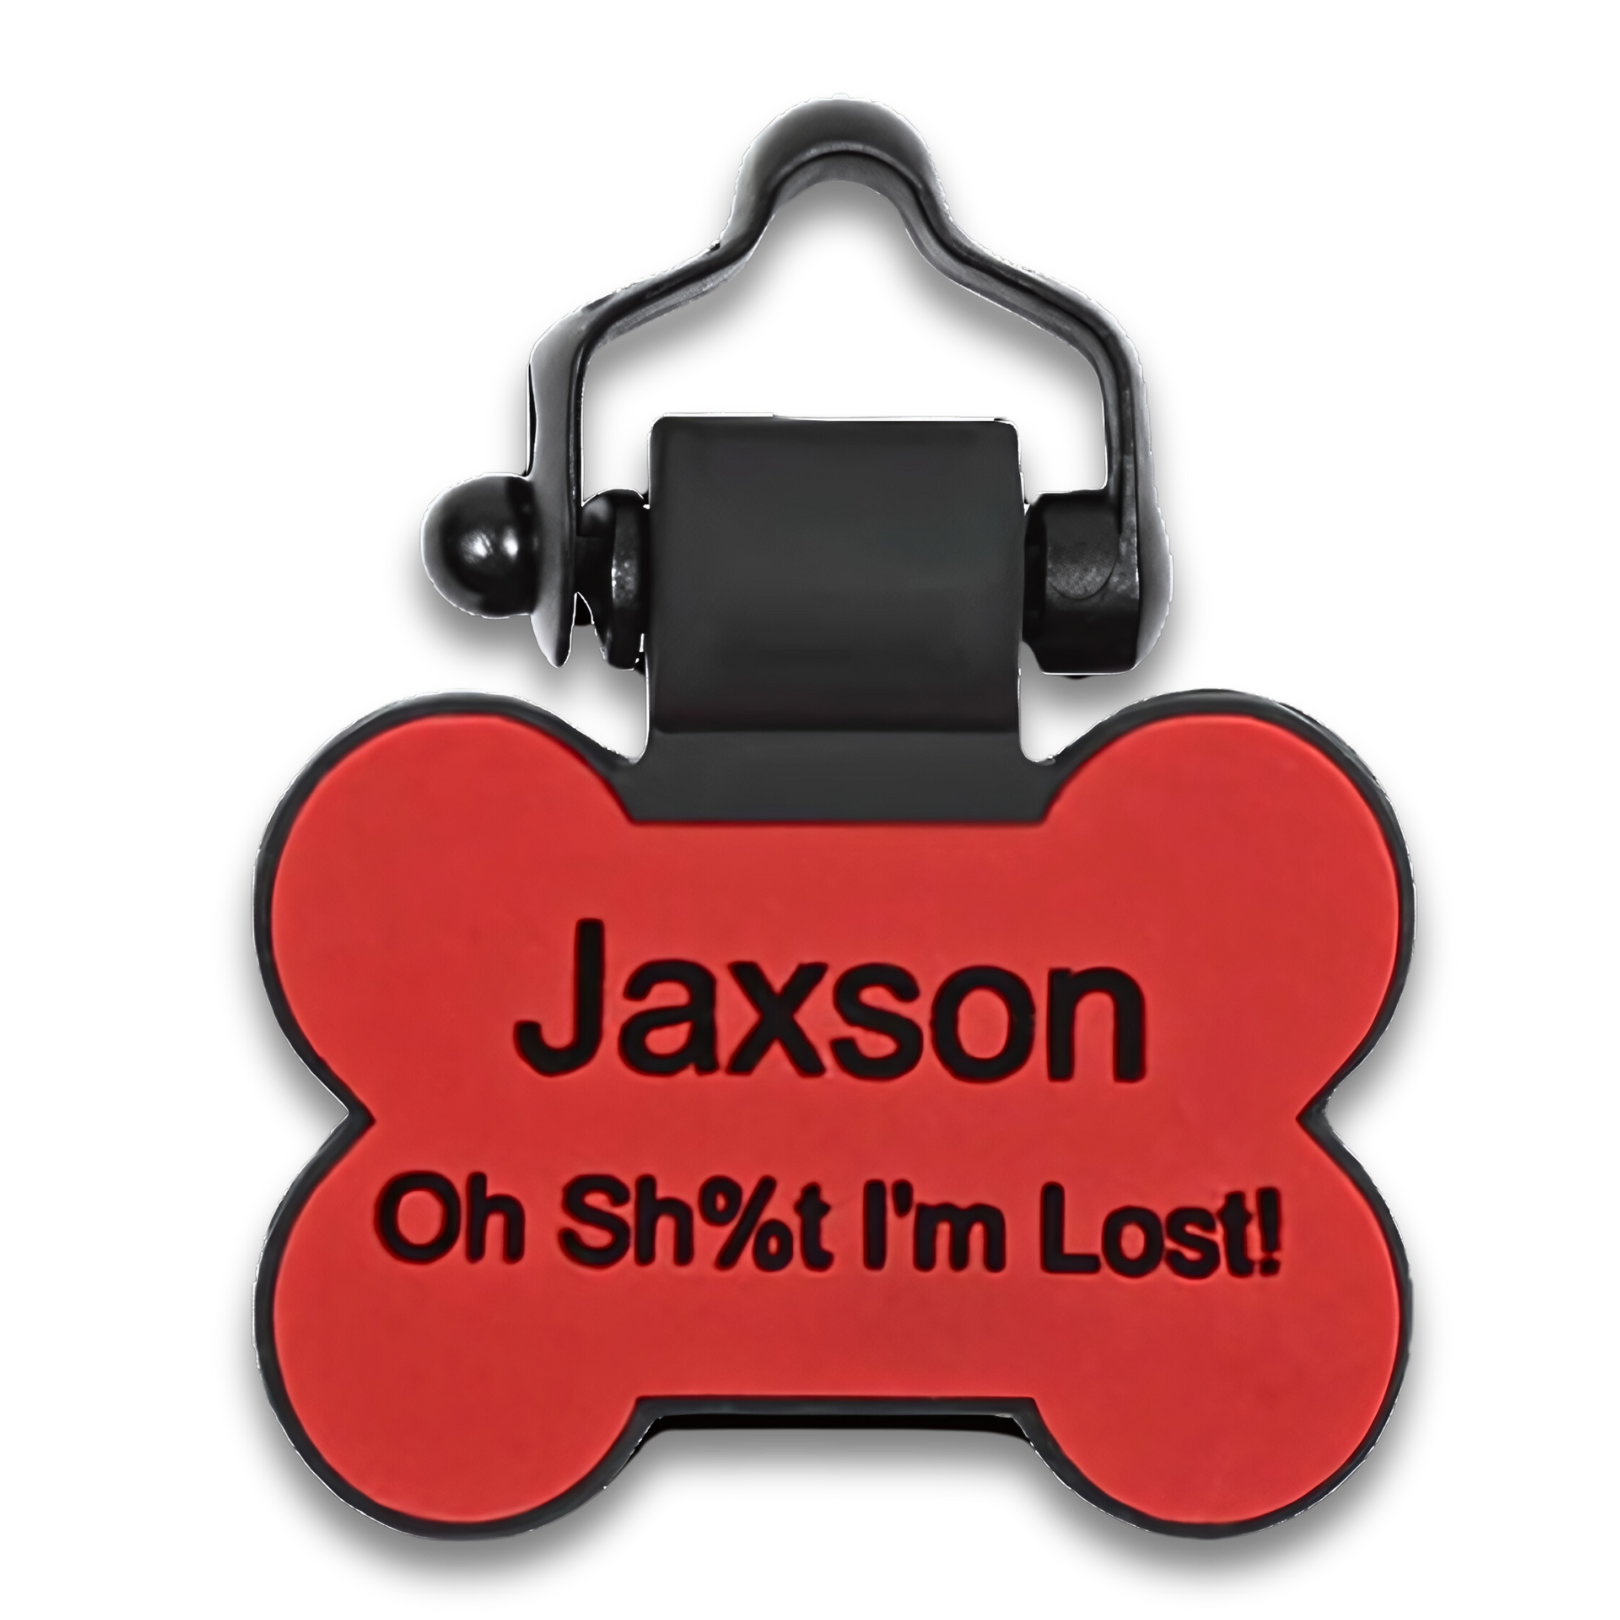 Red bone-shaped pet tag with name 'Jaxson' and text 'Oh Sh%t I'm Lost!'